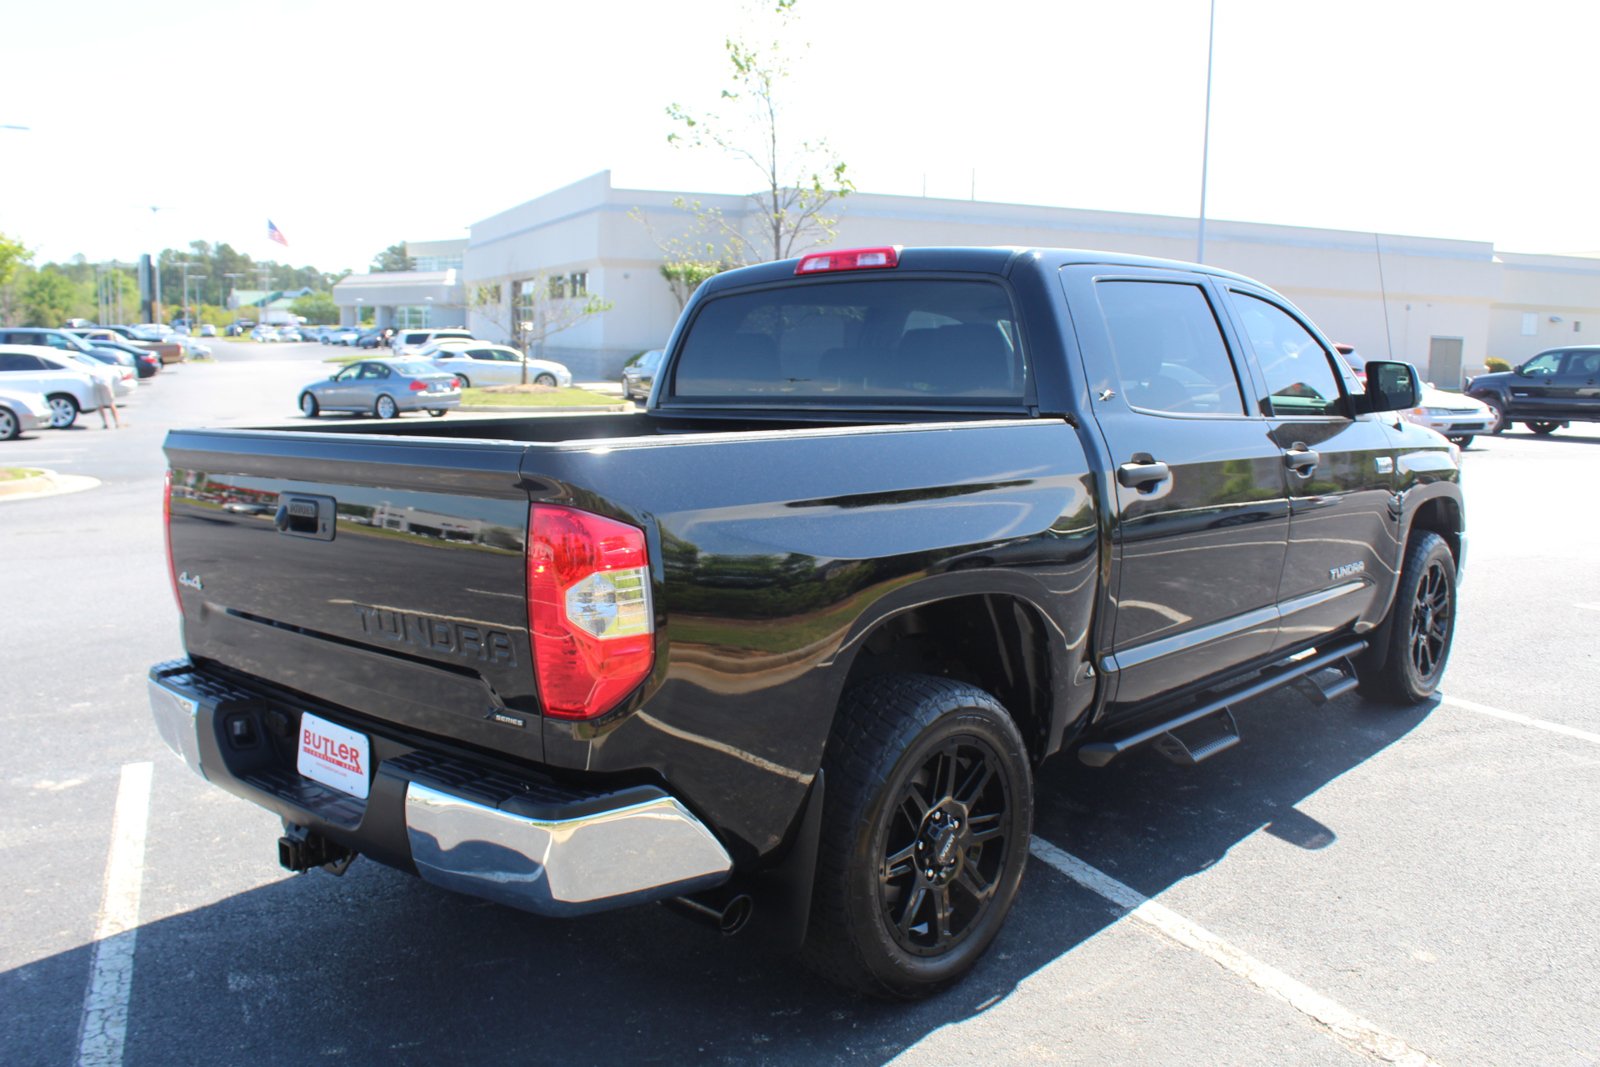 Pre-Owned 2019 Toyota Tundra 4WD SR5 Crew Cab Pickup in Macon #L8217